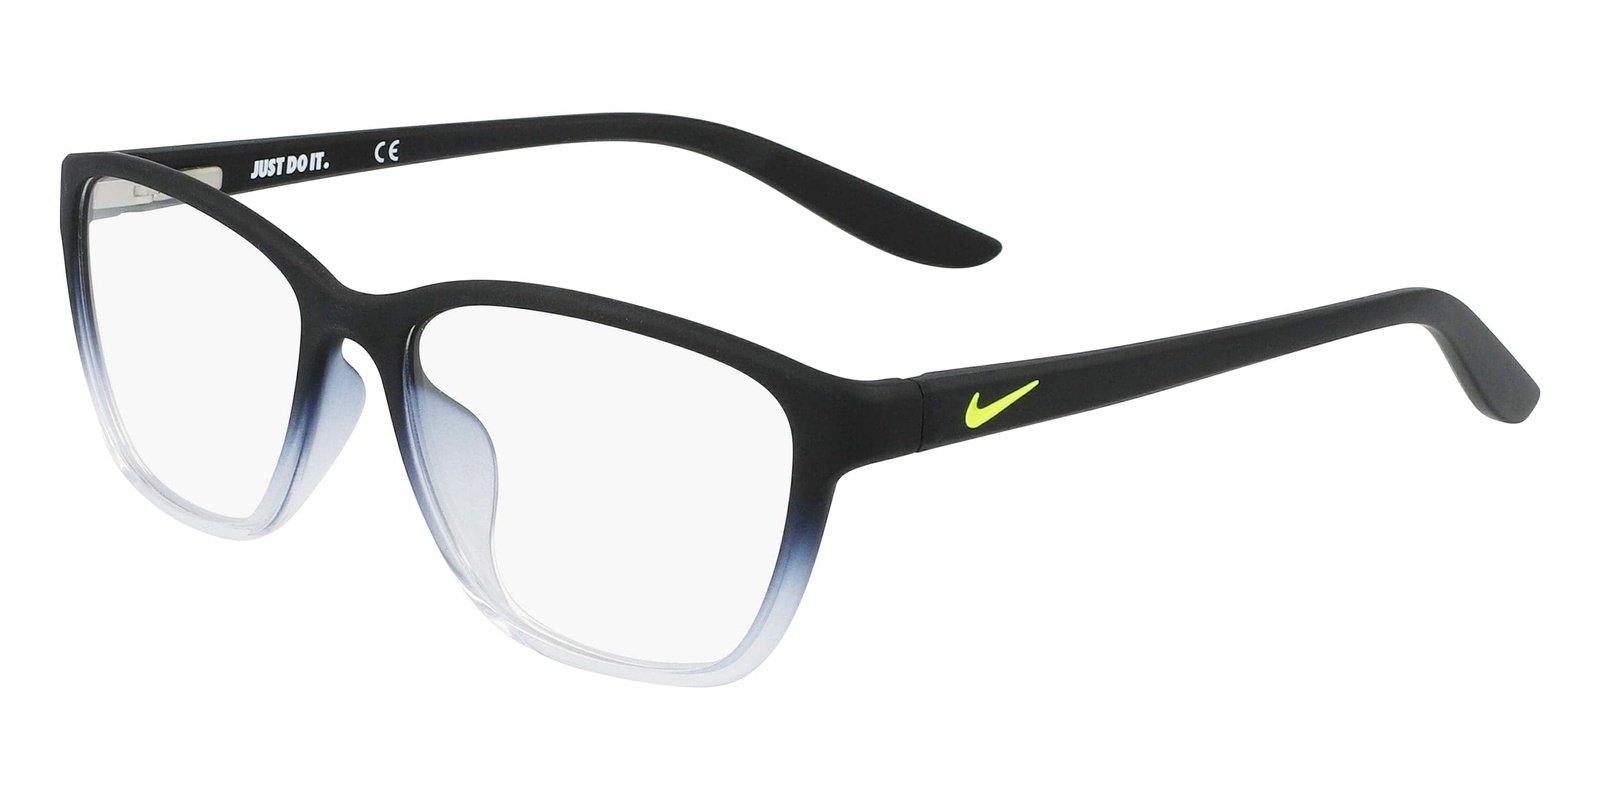 Nike 5028 Black (010) | Spectacle Clinic